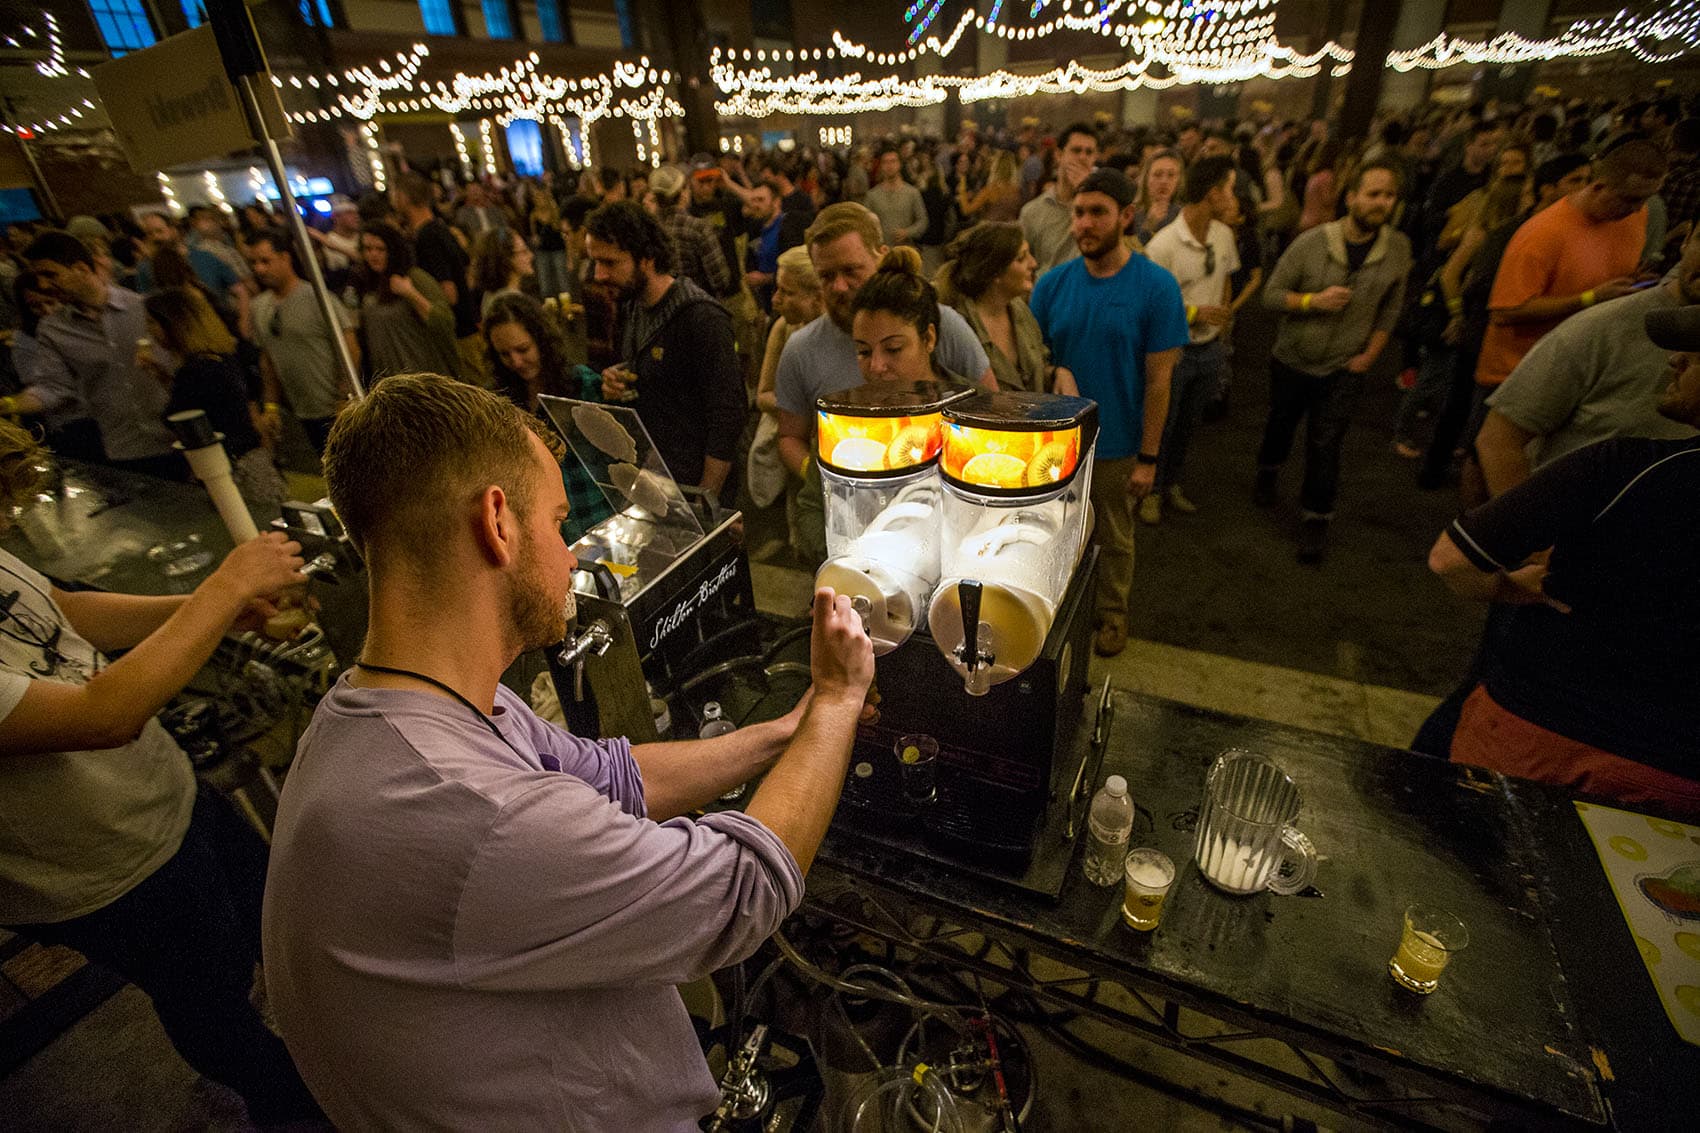 Hundreds gathered for the Copenhagen Beer Festival at the SoWa Power Station in the South End Friday and Saturday. Here, William Blennow of Sweden's Omnipollo Brewing tops a beer with frozen lemonade IPA as he serves a line that stretches to the other end of the building. (Jesse Costa/WBUR)